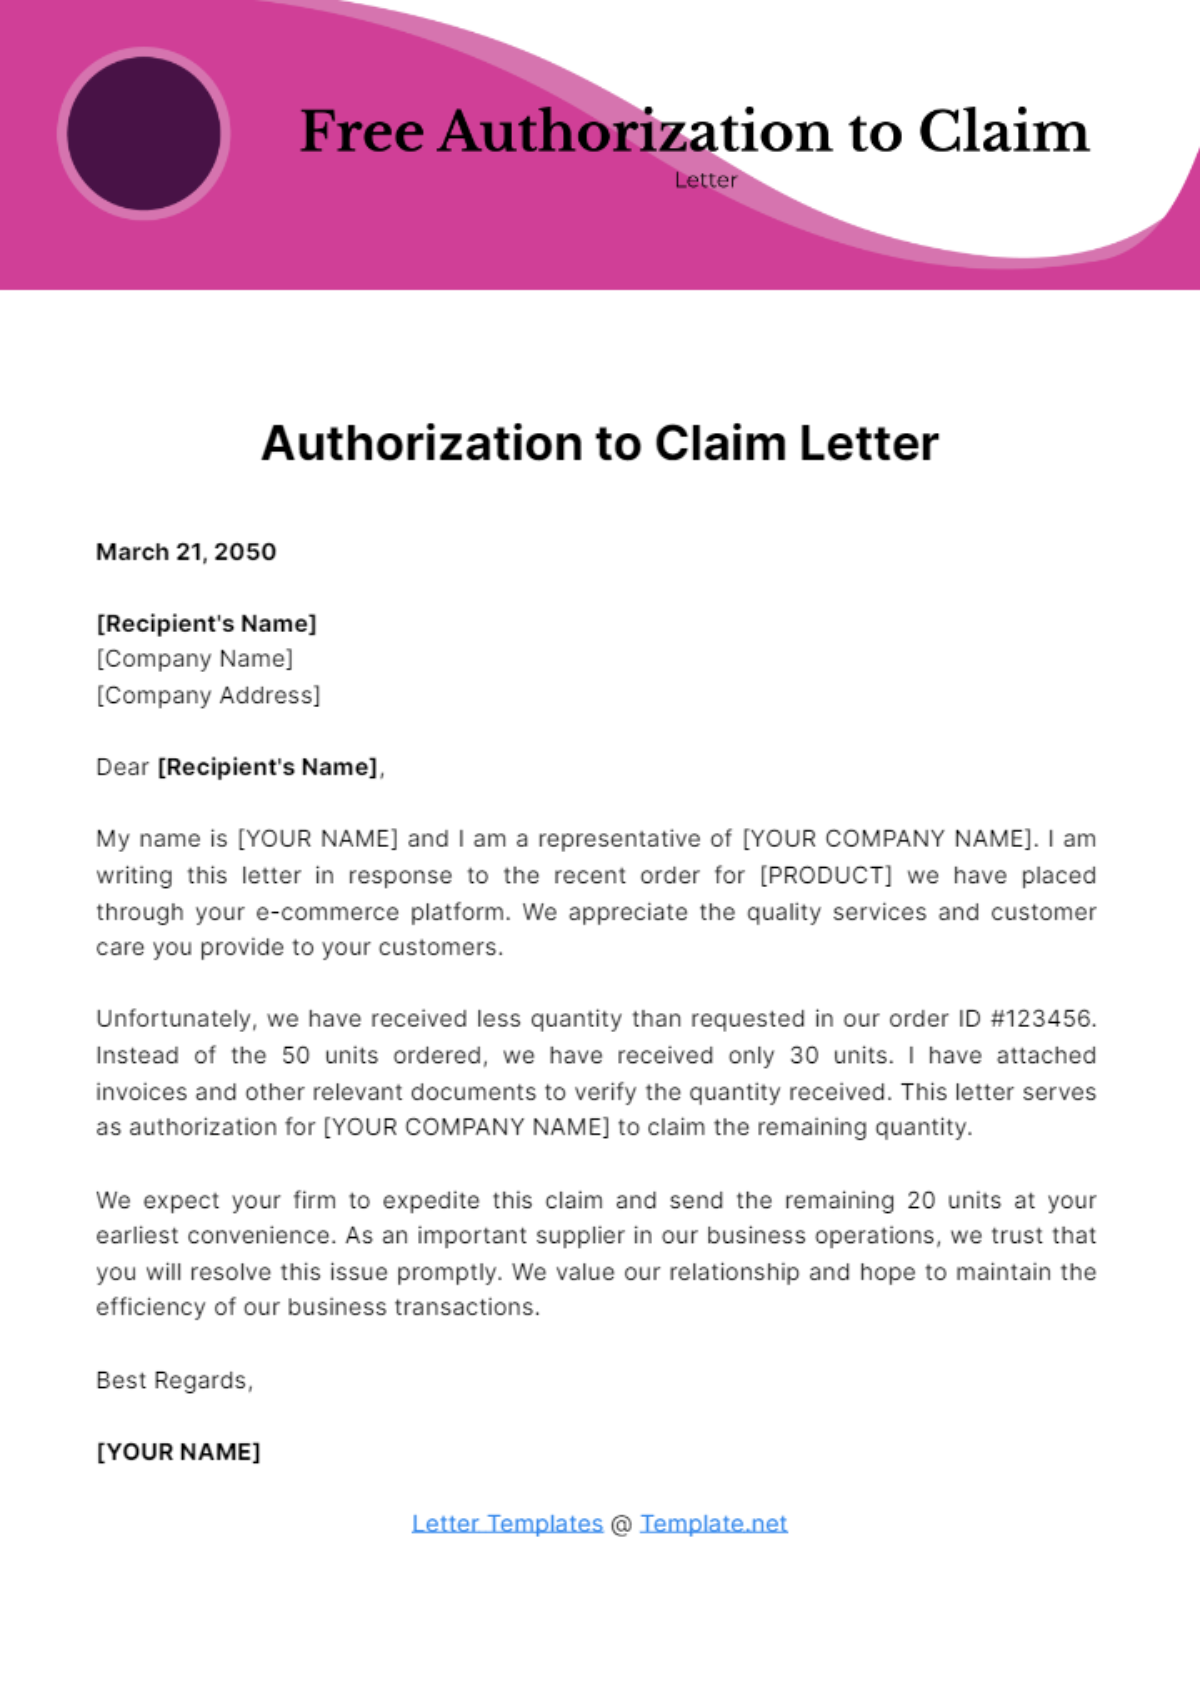 Free Authorization to Claim Letter Template